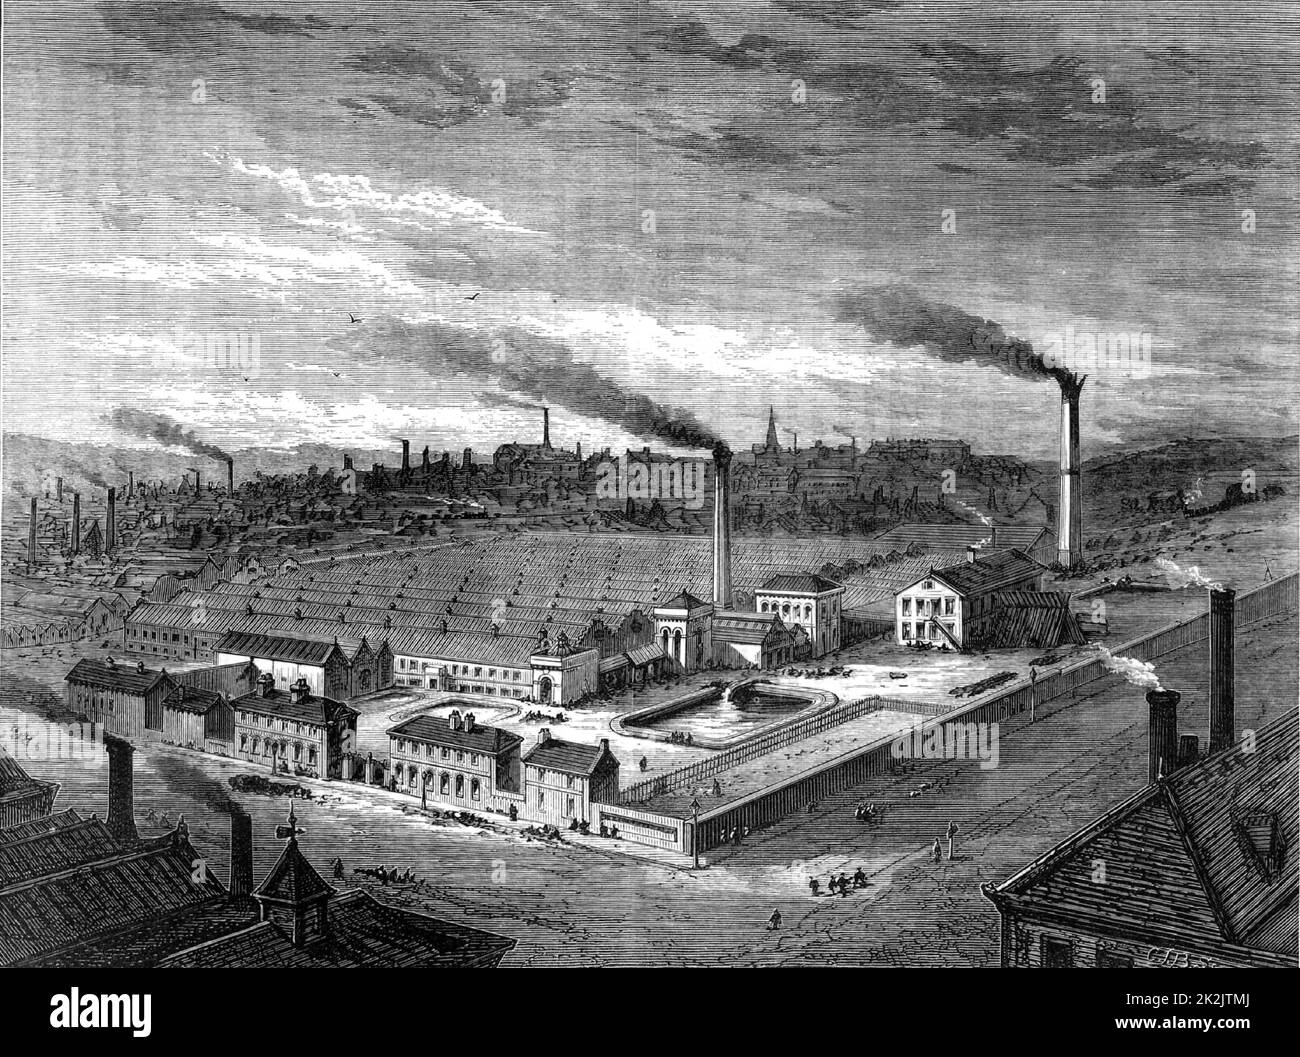 Isaac Holden & Sons' Alston Wool Combing Works, Bradford, Yorkshire, Inghilterra, c1880. Da "Great Industries of Great Britain" (Londra, c1880). Incisione. IO Foto Stock